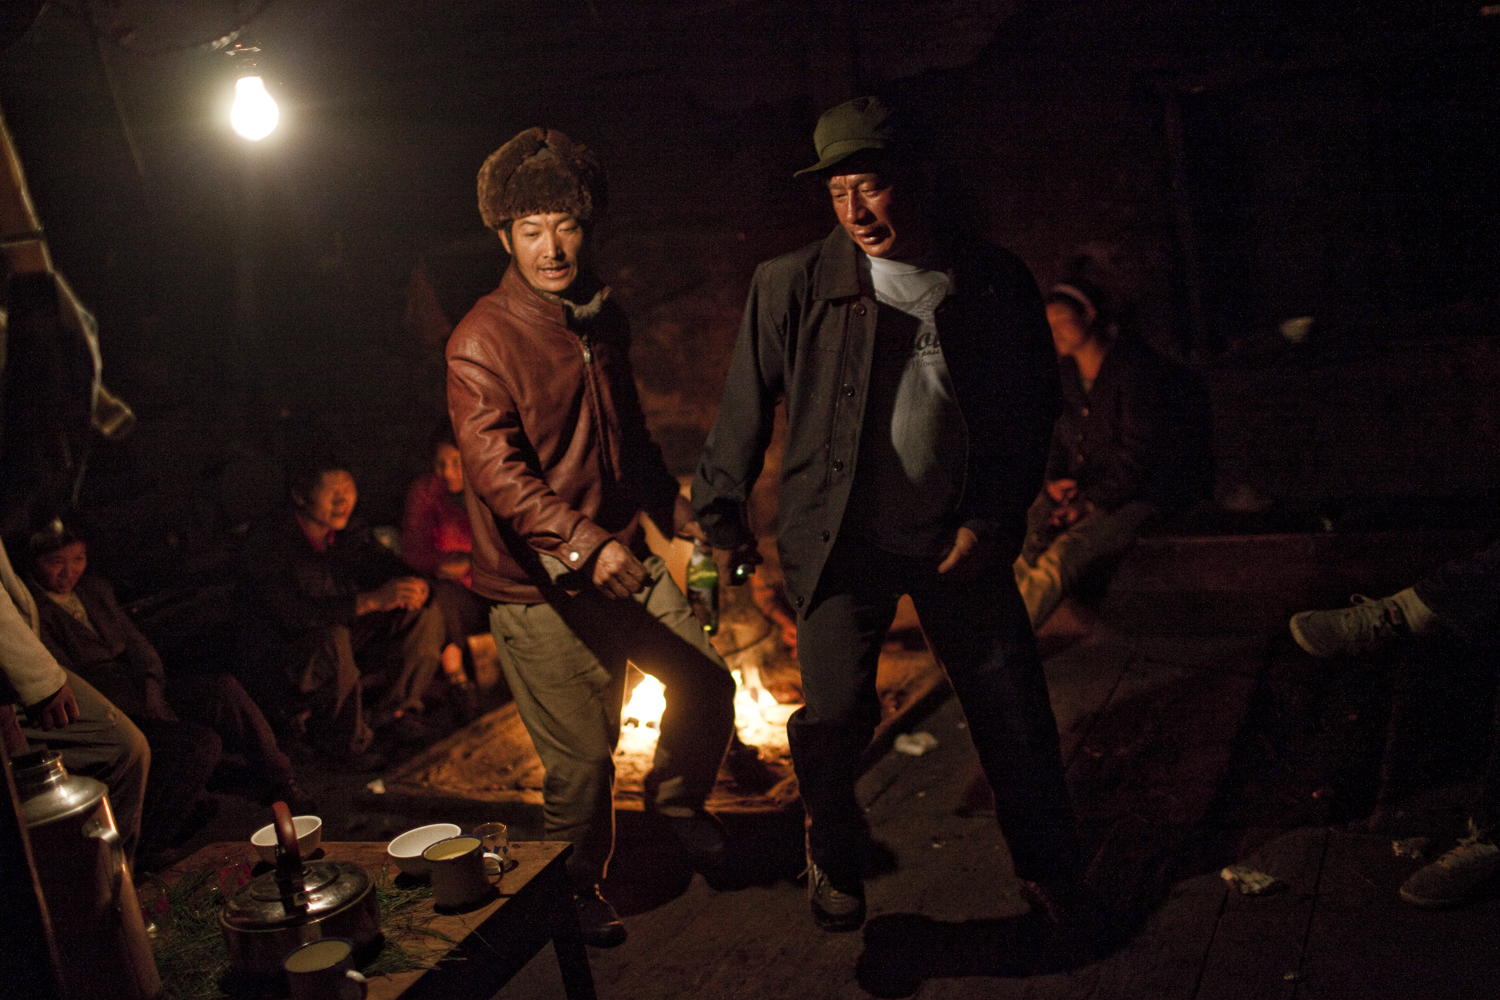  Qiunatong Village, Yunnan.&nbsp; Nu villagers gather at a home to drink and dance. At midnight on New Years Eve everyone was supposed to drink spring water but most never made it out of these house parties.&nbsp;&nbsp; 